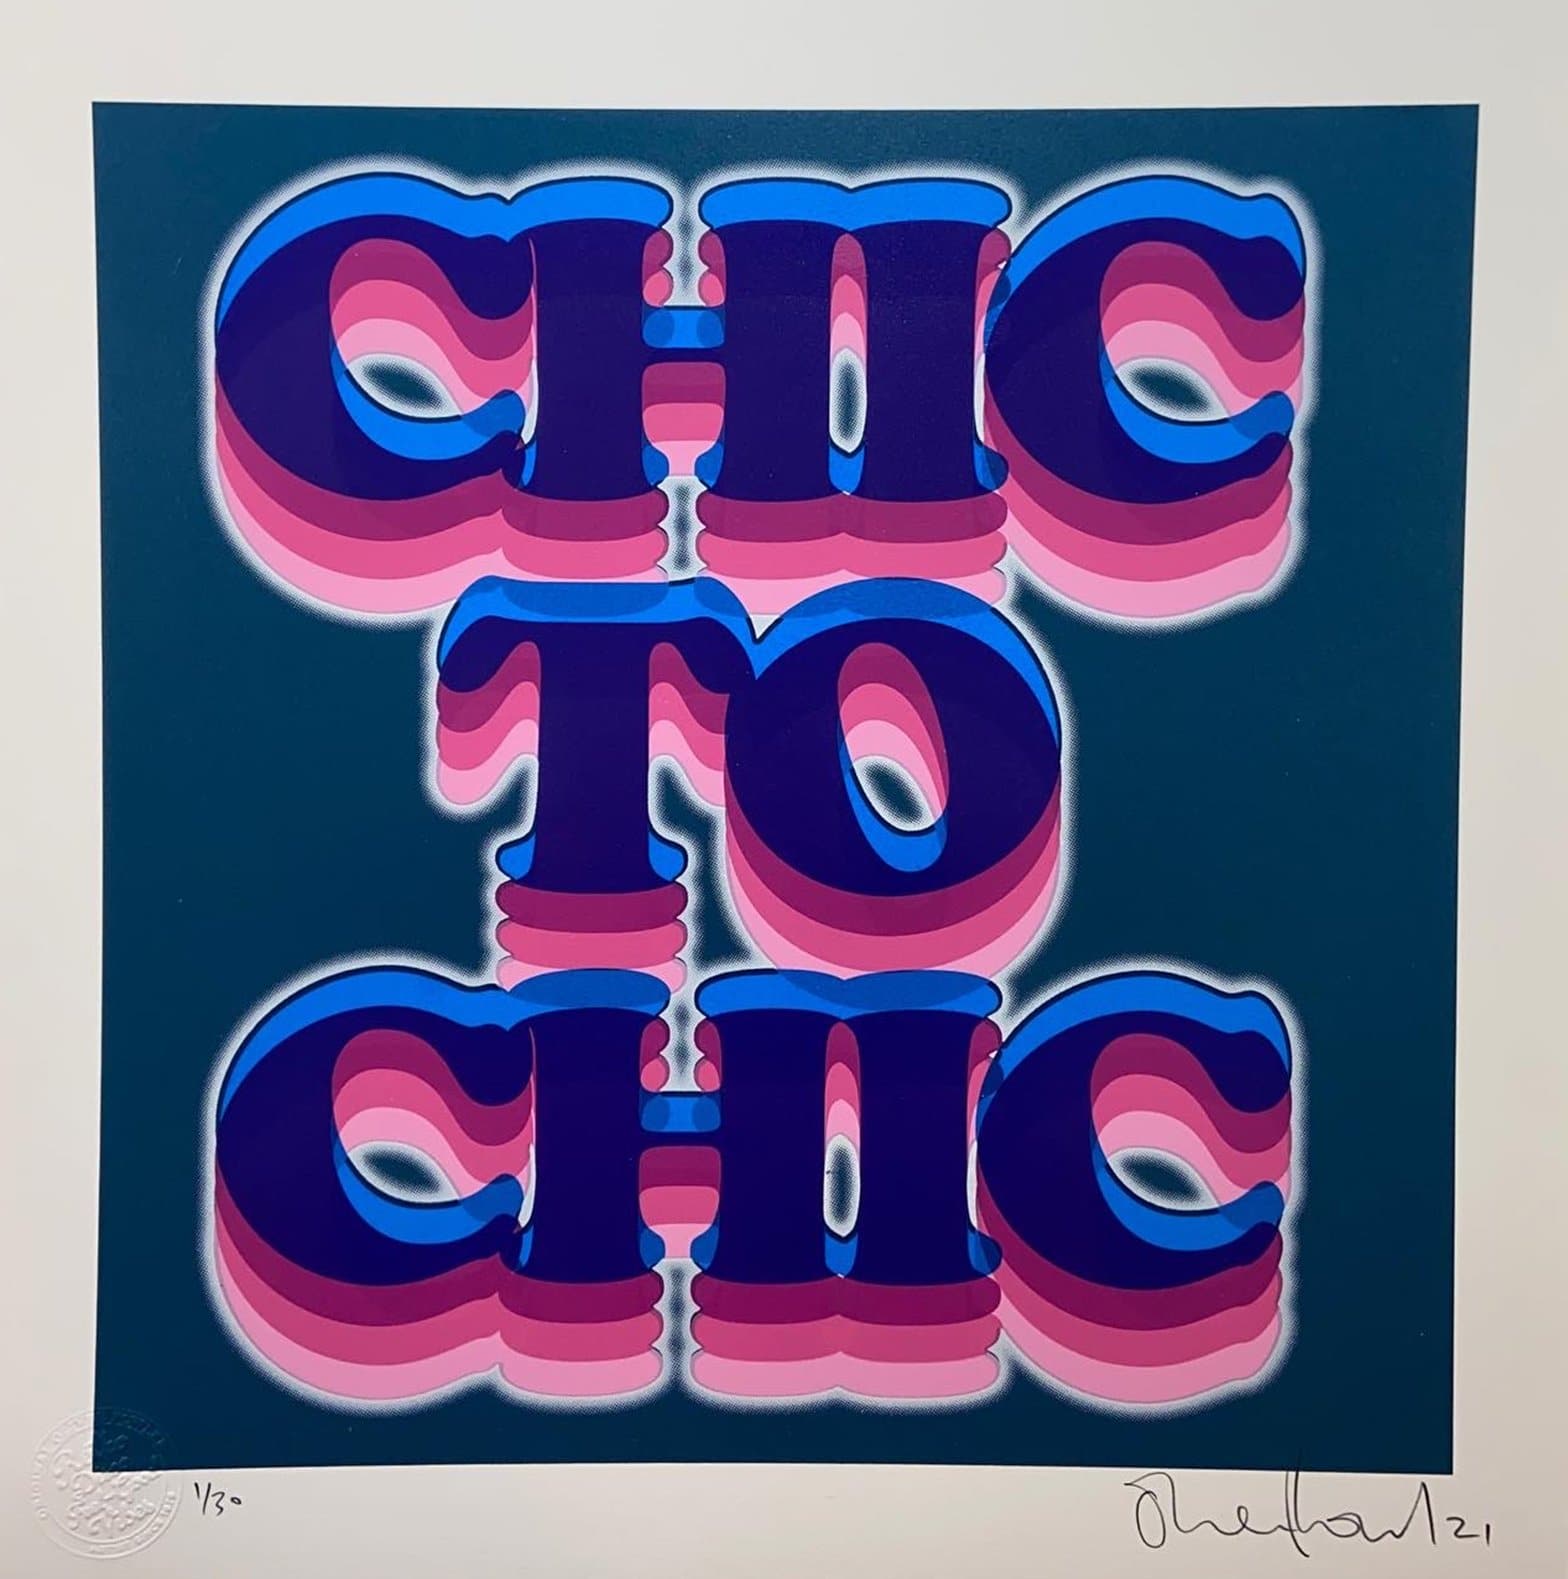 Image of Chic To Chic artwork by Oli Fowler, free delivery